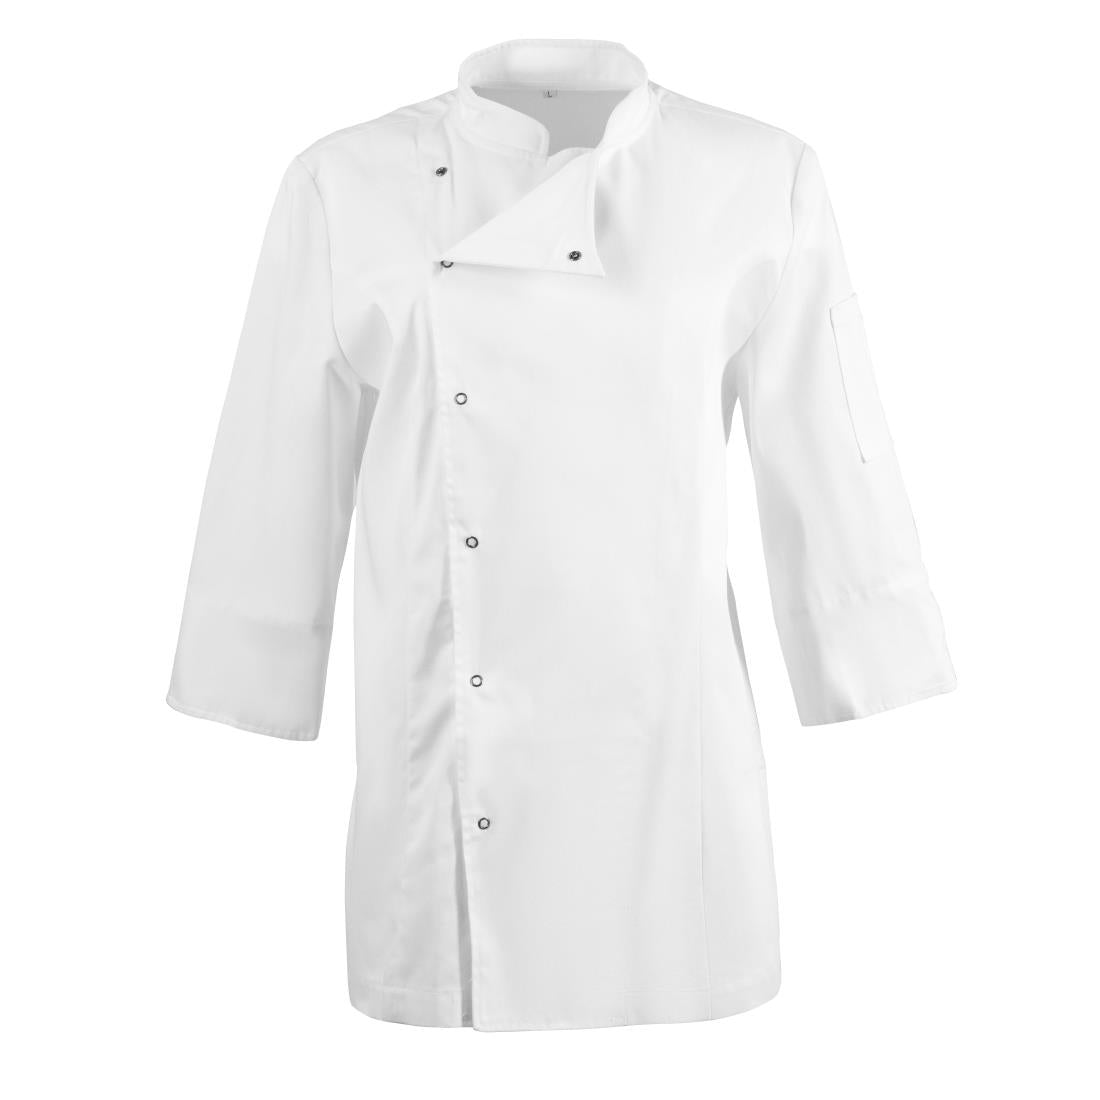 BB701-S Whites Ladies Fitted Jacket - Size S JD Catering Equipment Solutions Ltd